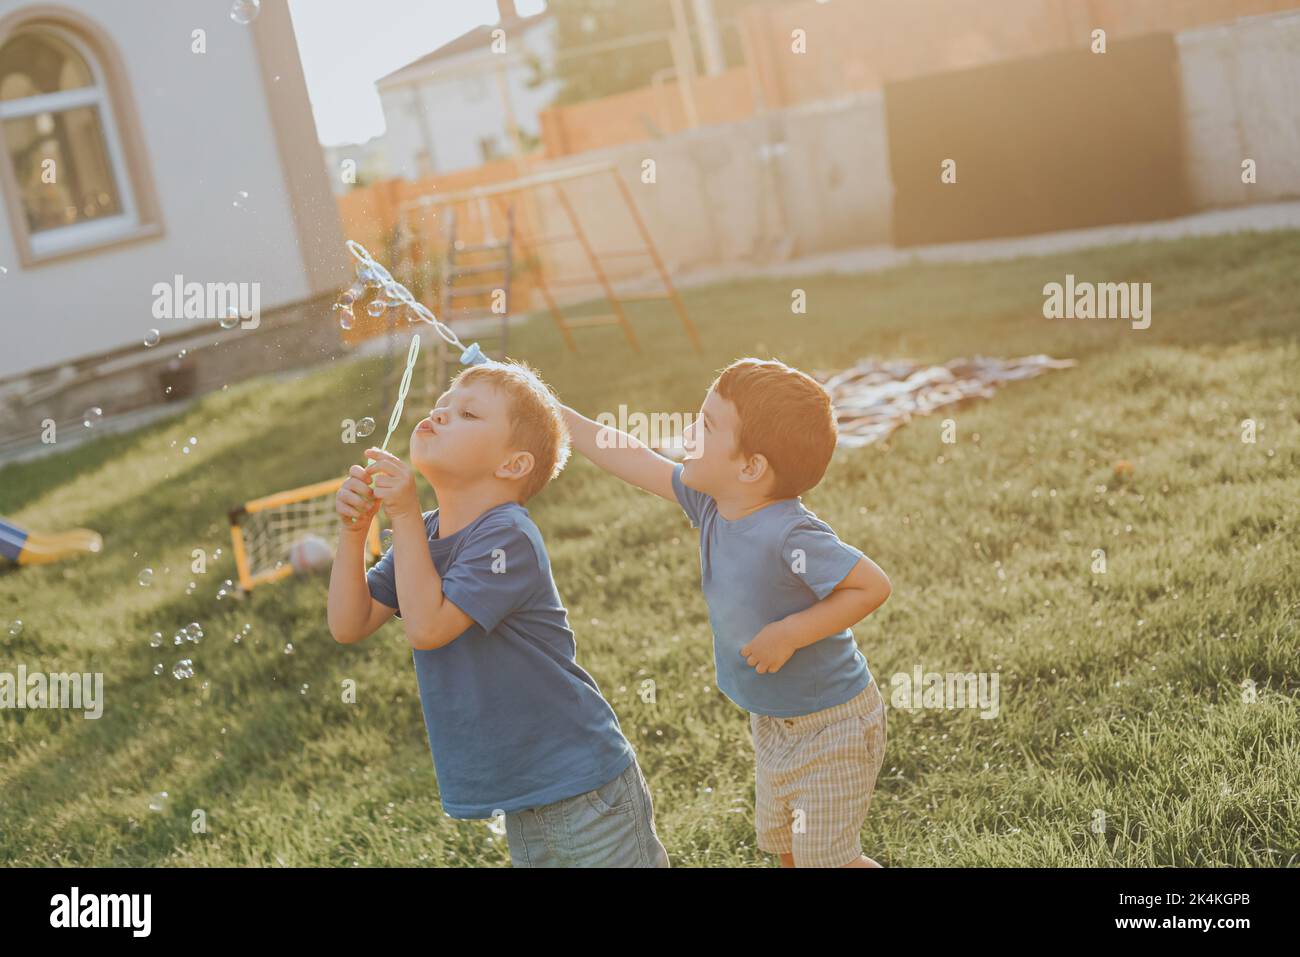 Two boys blow bubbles in the backyard. Summer lifestyle. Stock Photo